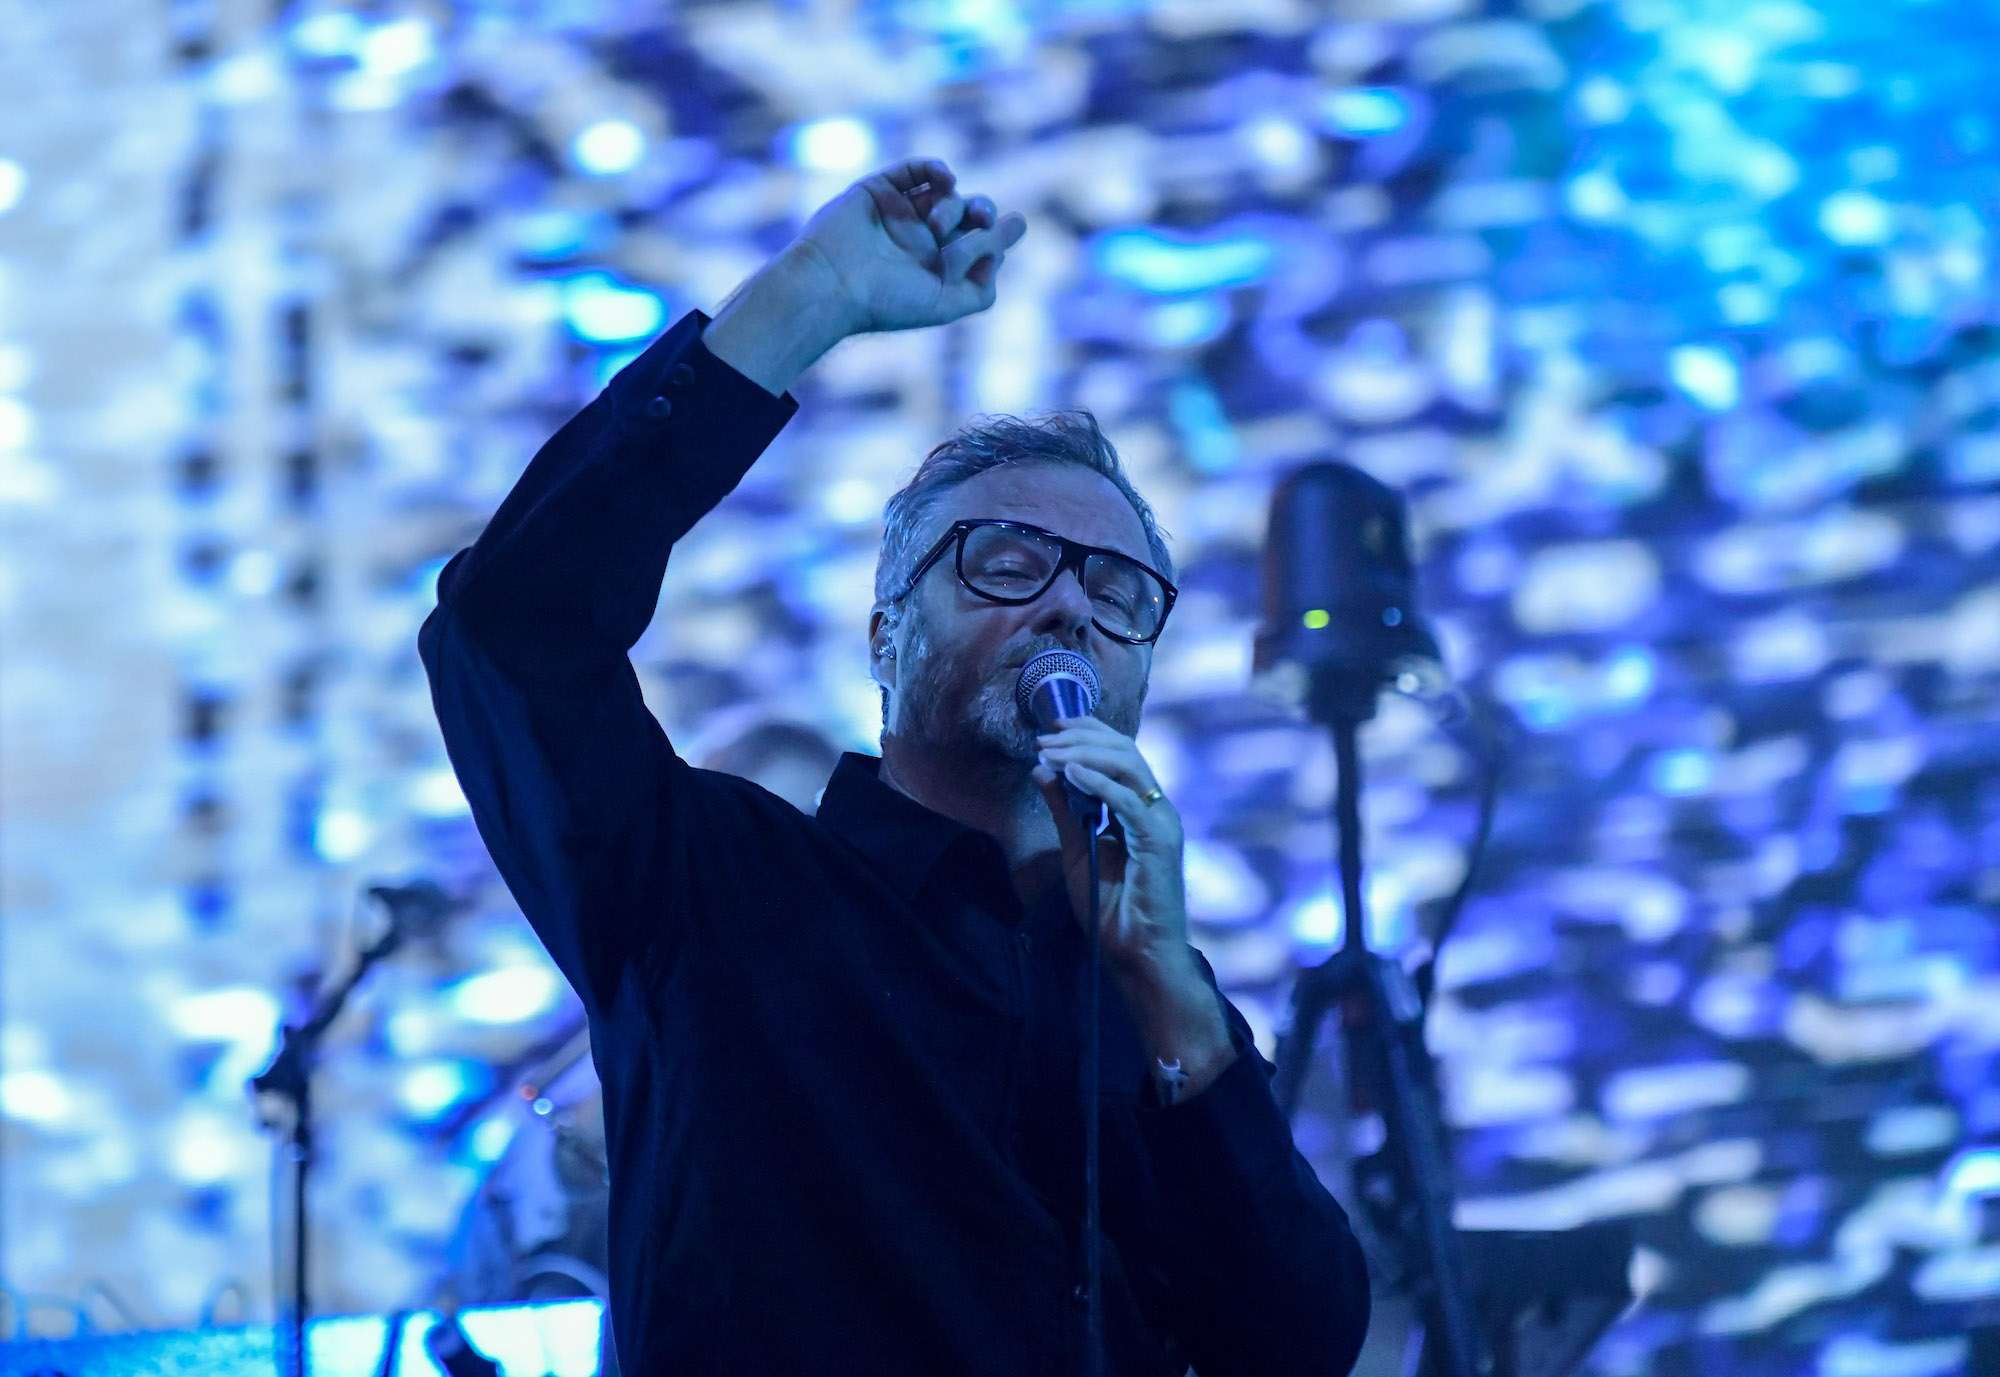 The National Live At Pitchfork [GALLERY] - Chicago Music Guide